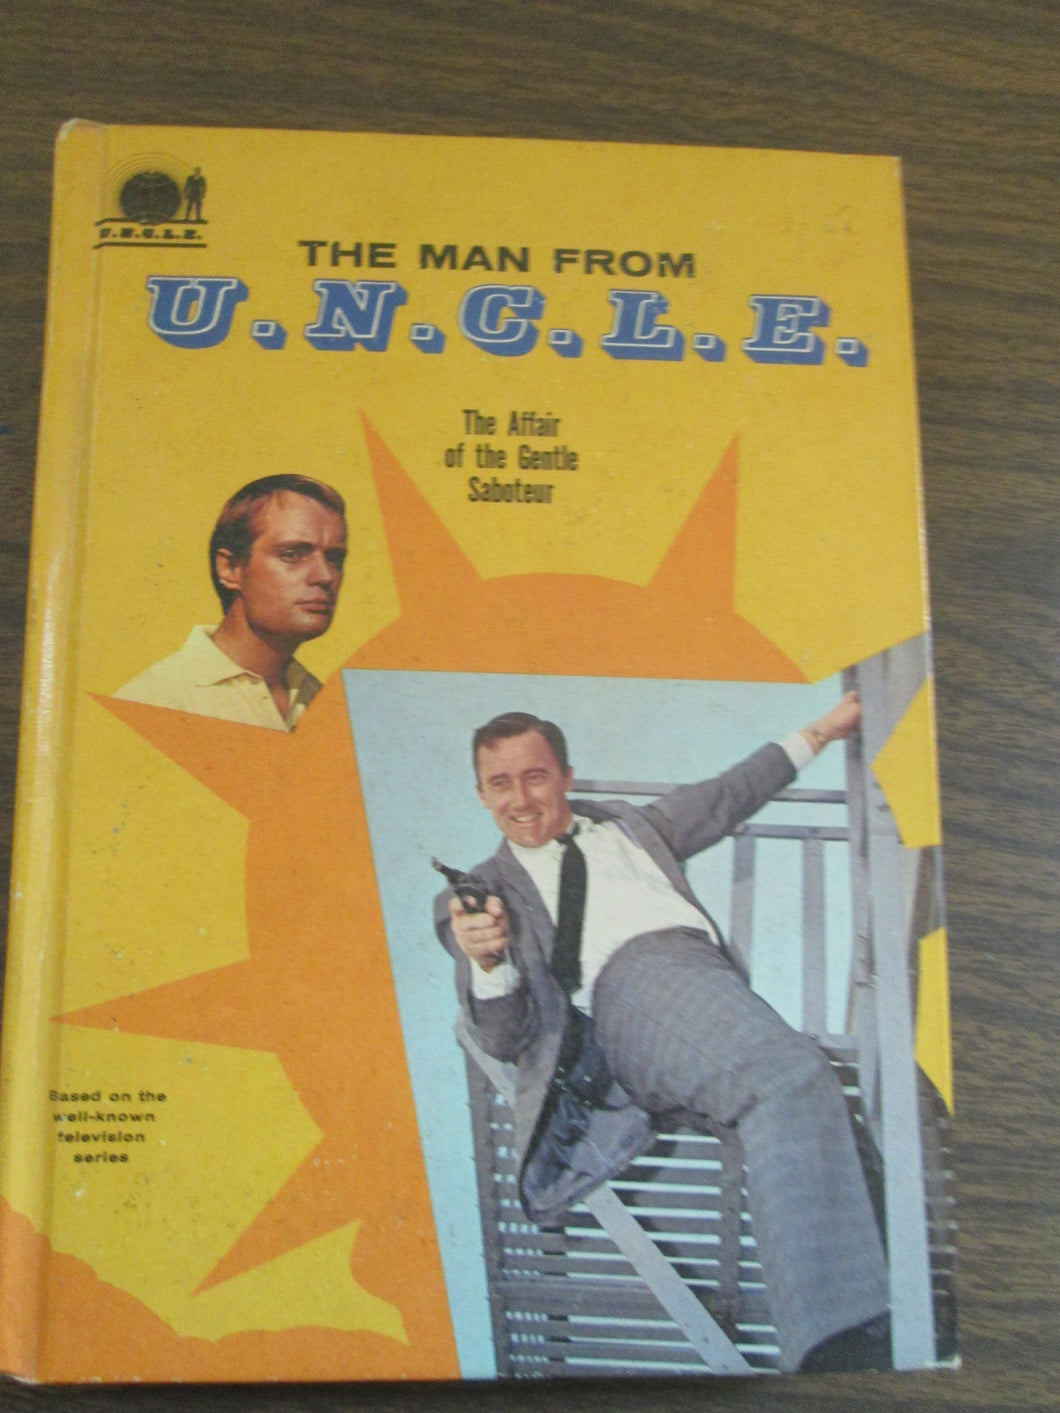 The Man From U.N.C.L.E. The Affair of the Gentle Saboteur TV Adventure Book by Brandon Keith HC 1966